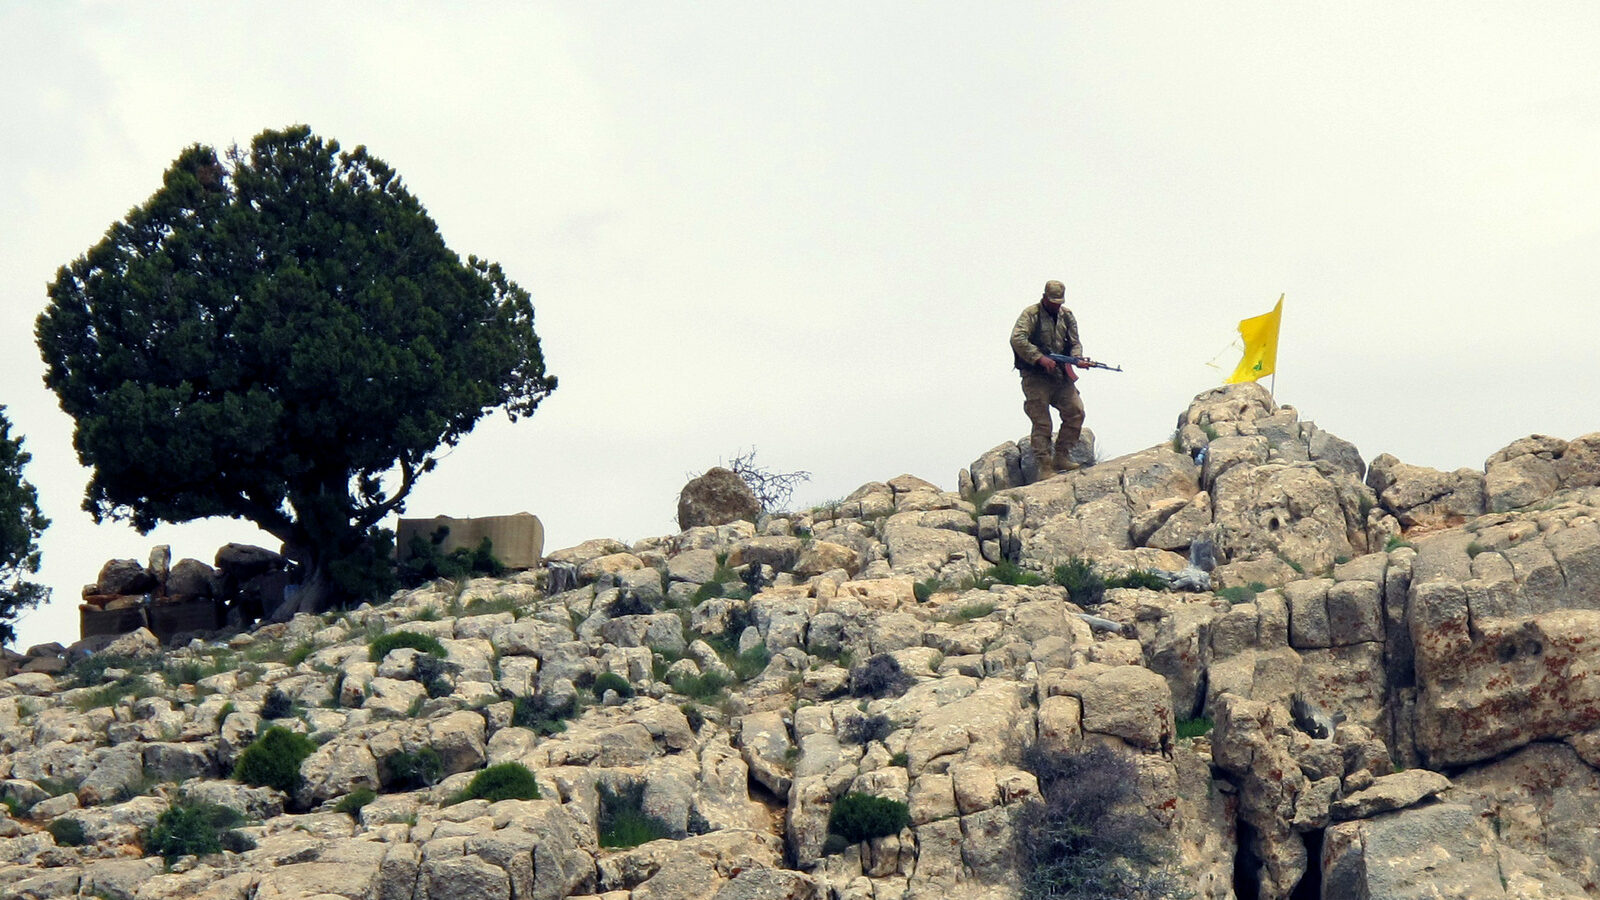 A Hezbollah fighter stands on a hill next to the group's yellow flag in the fields of the Syrian town of Assal al-Ward in the mountainous region of Qalamoun, Syria. (AP/Bassem Mroue)